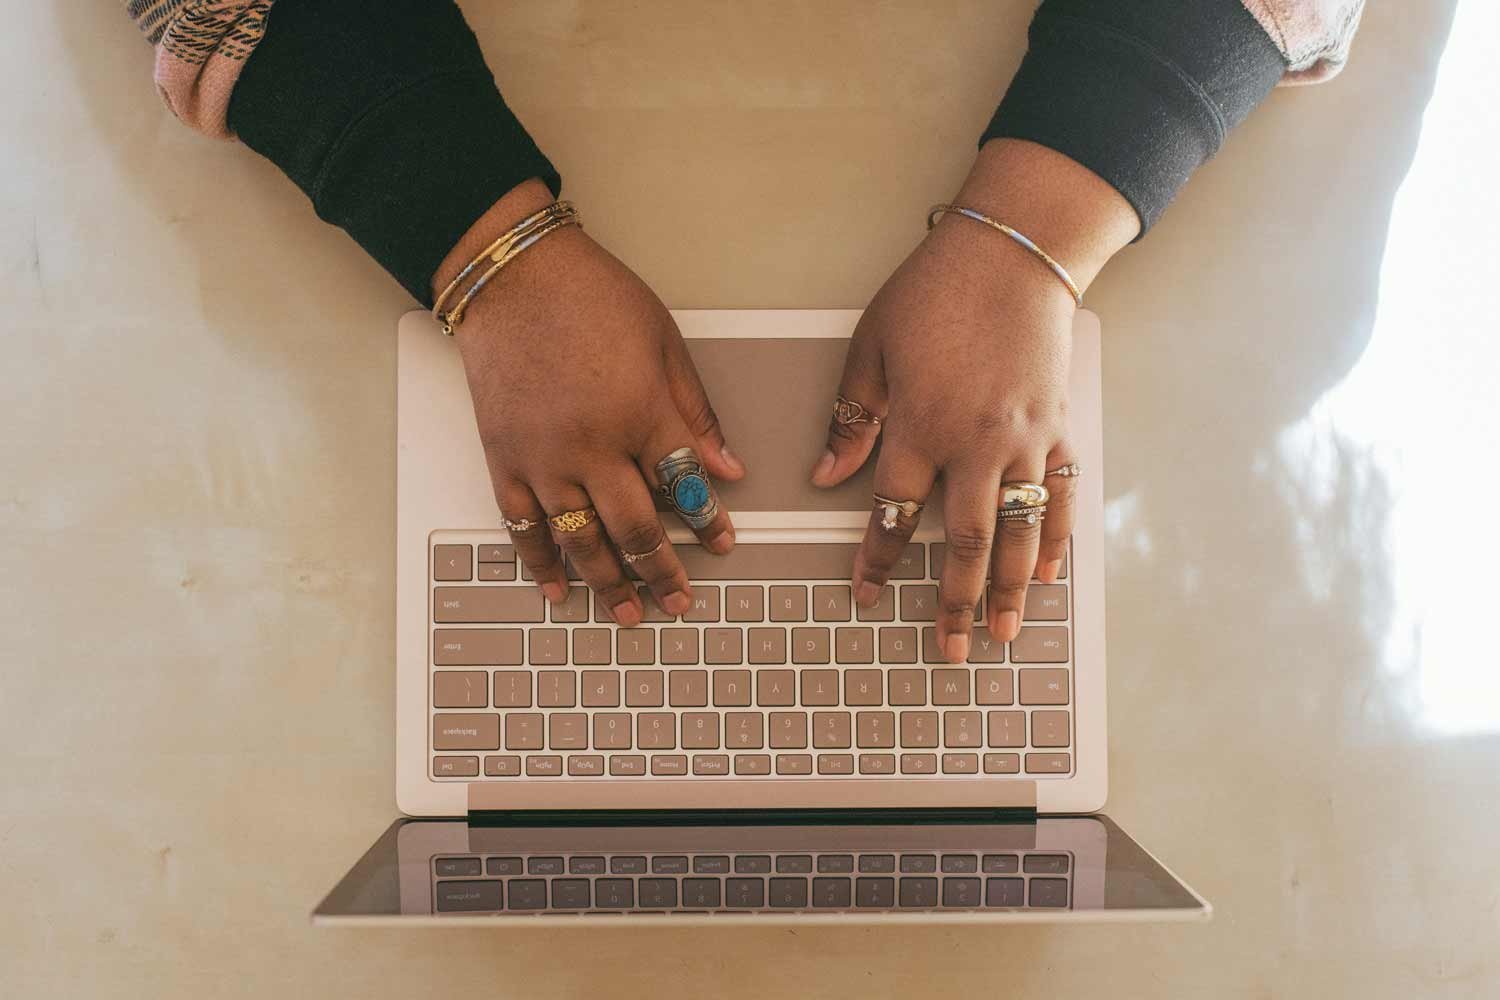 A woman is engrossed in her work, typing intently at her computer. She is diligently crafting a HubSpot workflow, her concentration and precision evident as her fingers swiftly move across the keyboard.